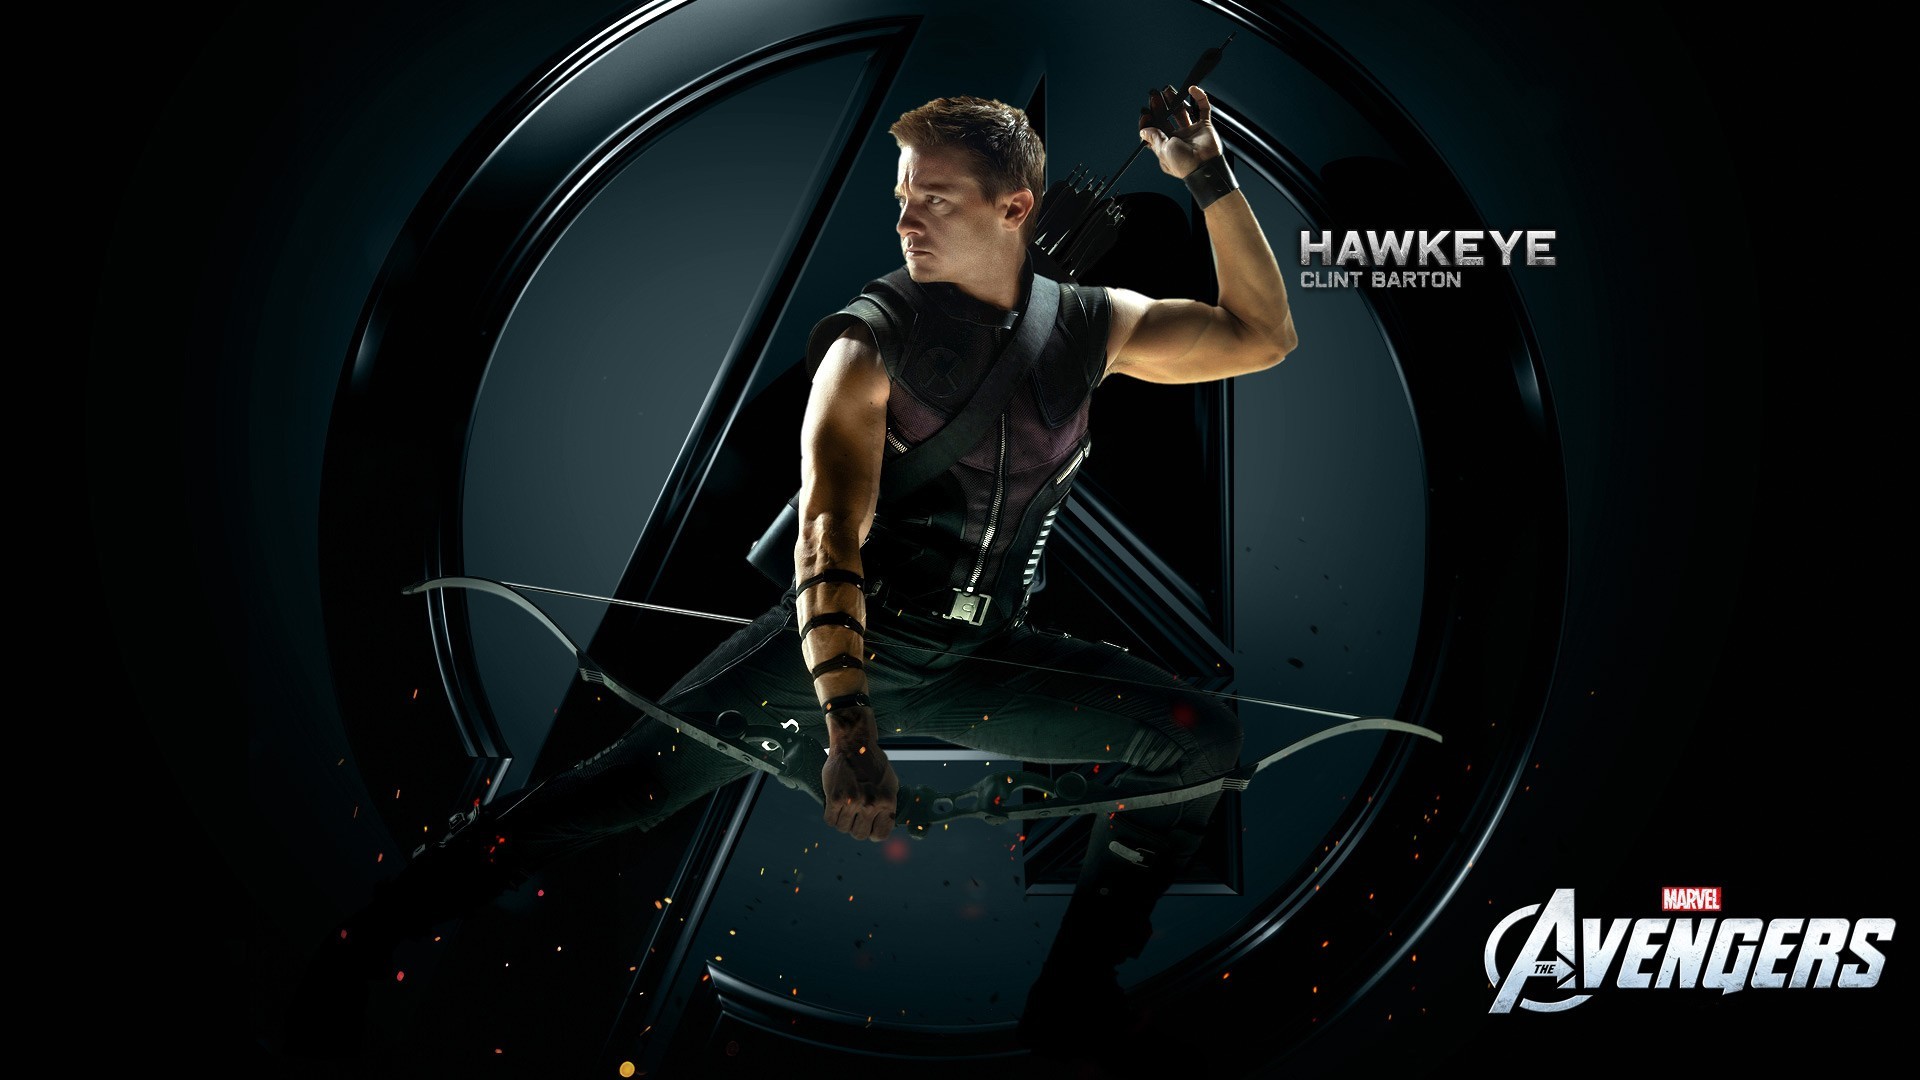 General 1920x1080 Hawkeye Clint Barton Jeremy Renner The Avengers Marvel Cinematic Universe movies